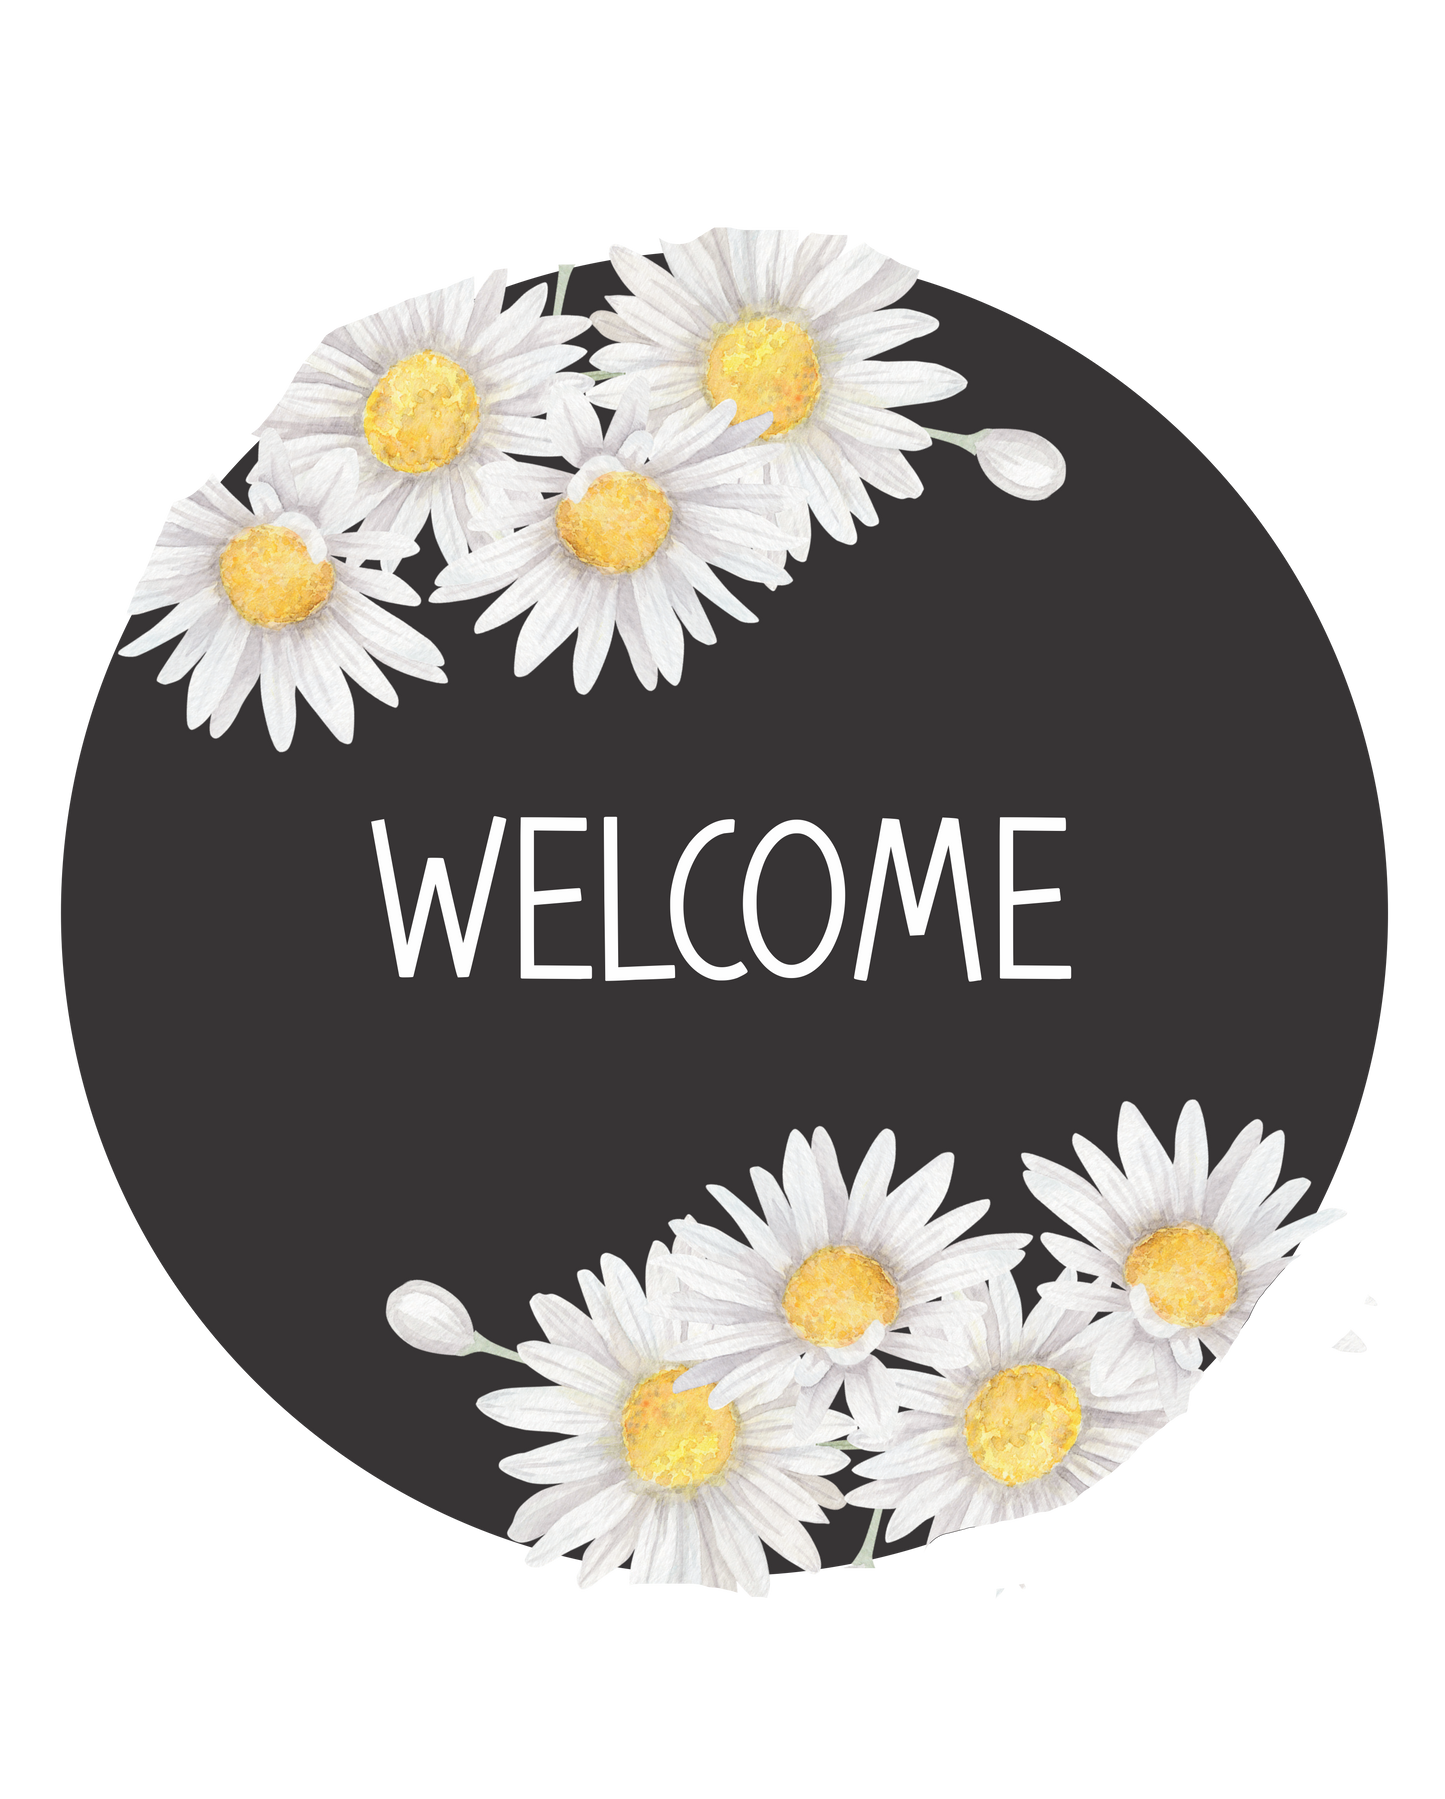 Welcome Daisy black and white round